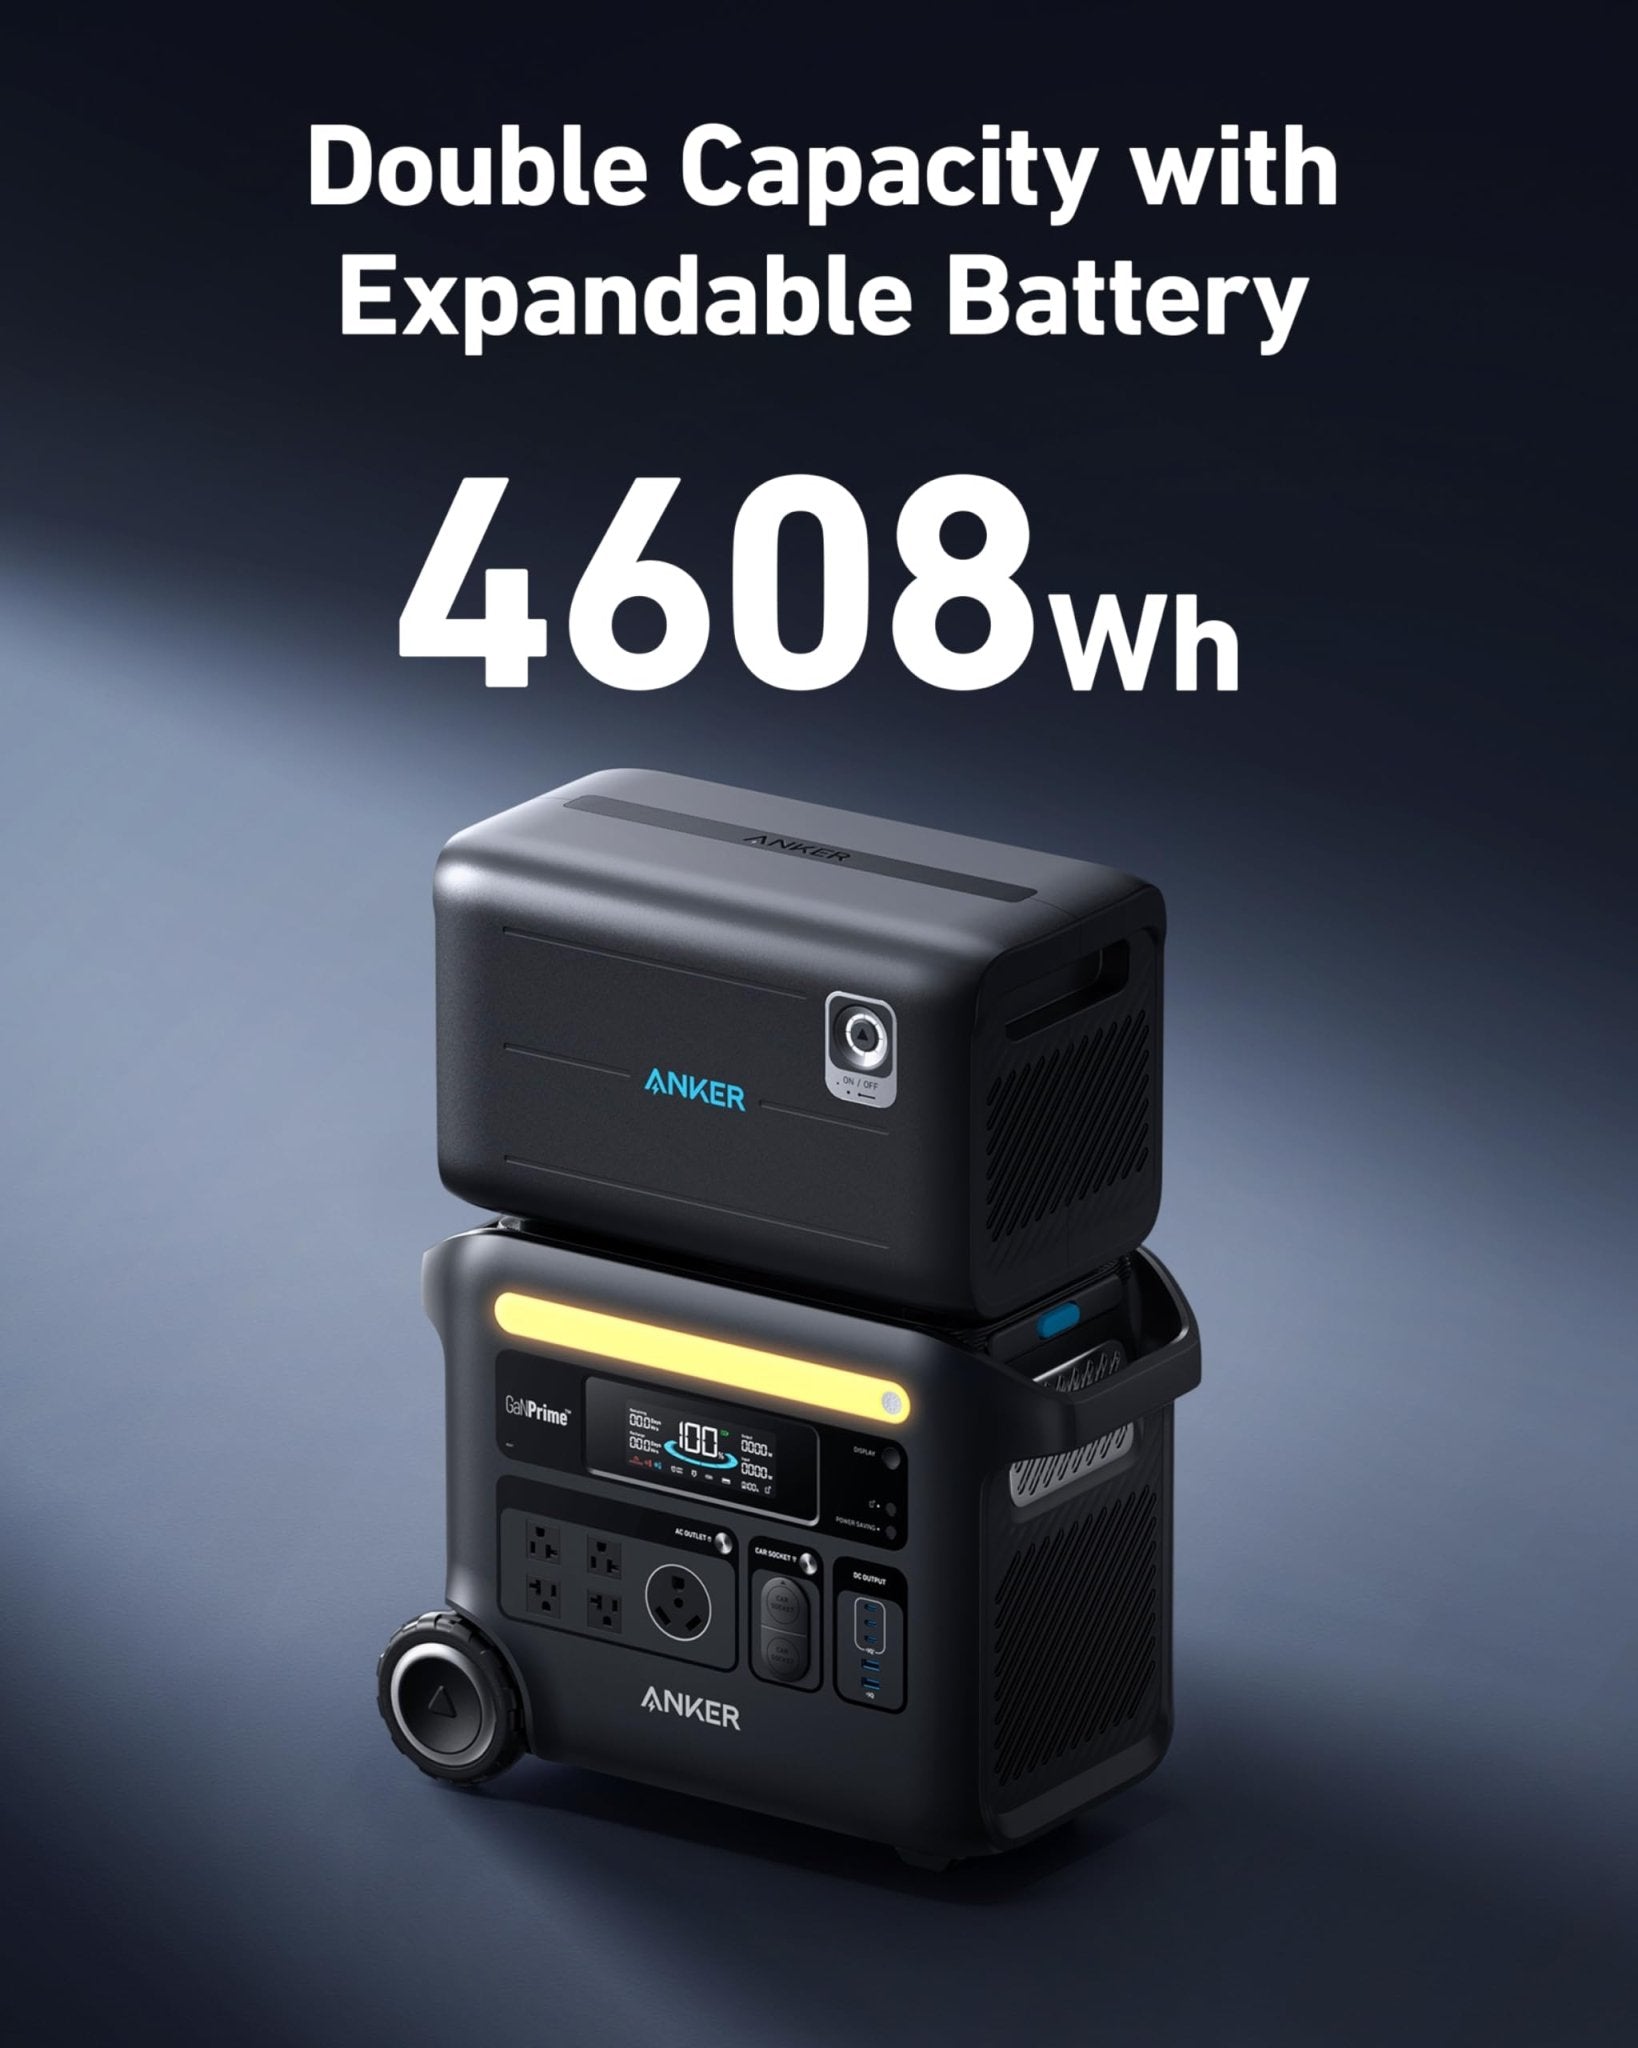 Anker SOLIX F2600 with Expansion Battery - 4608Wh | 2400W - Solar Generators and Power Stations Plus